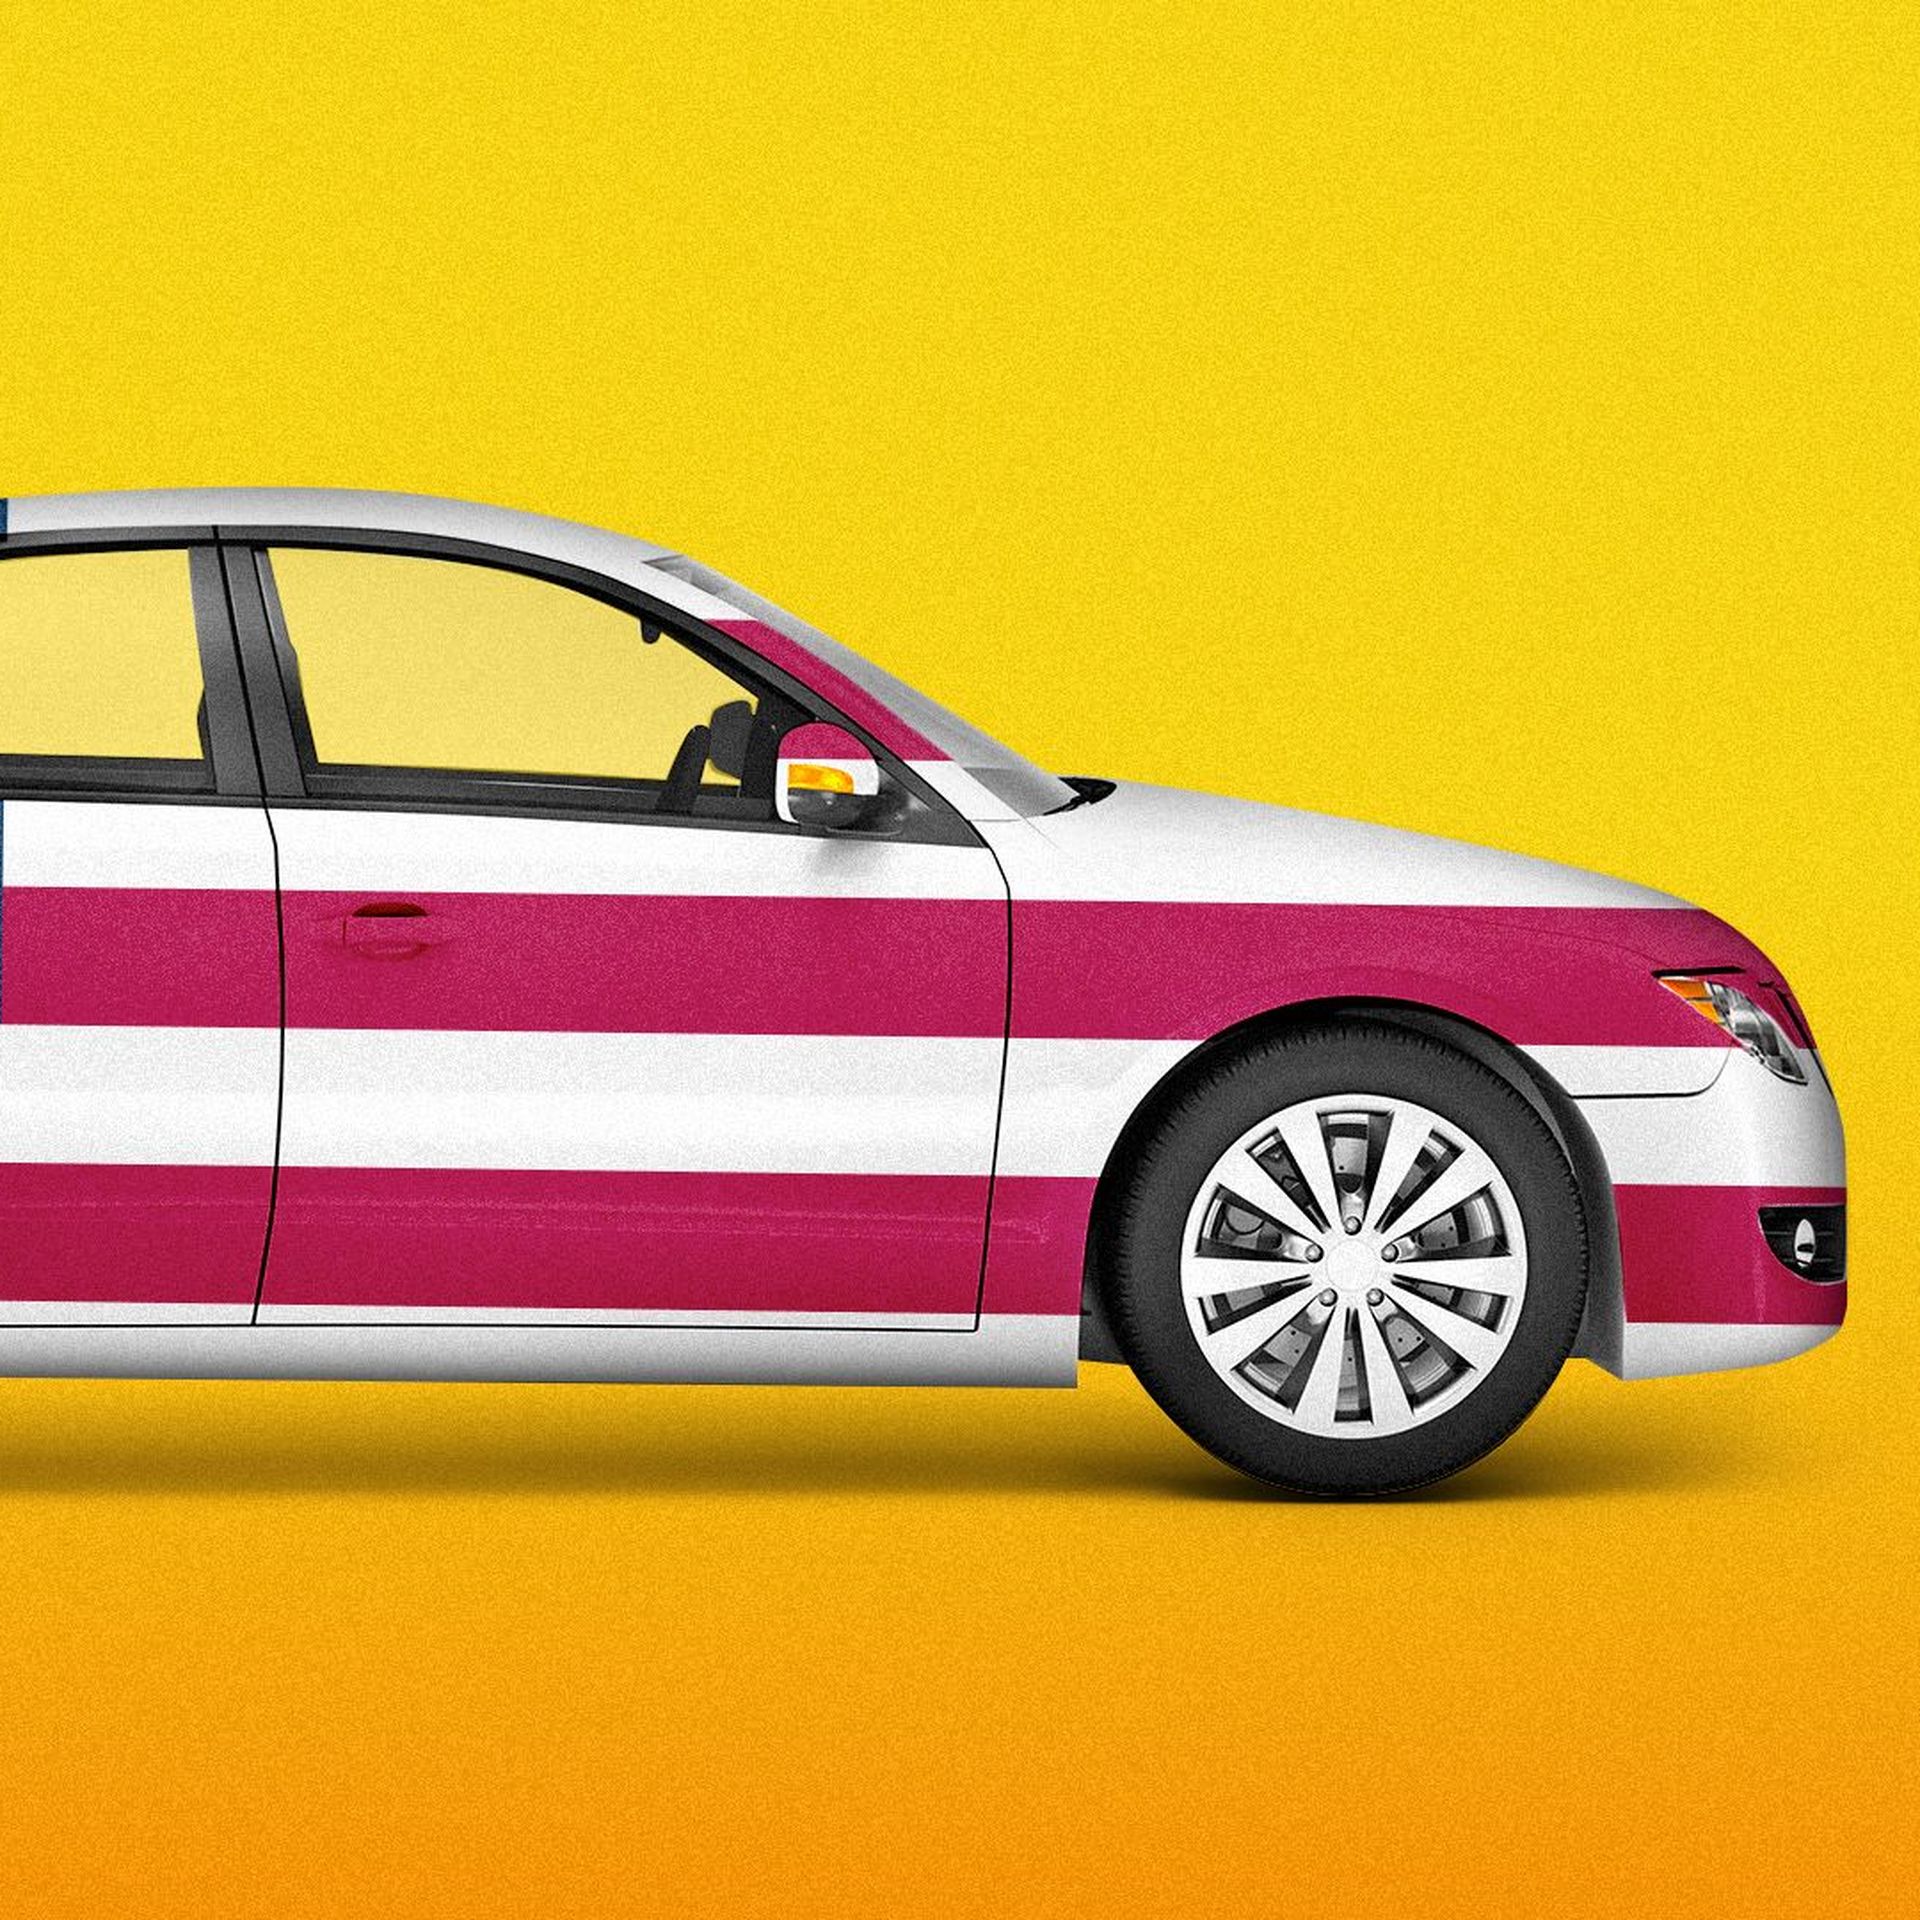 Illustration of a car with an American flag pattern. 